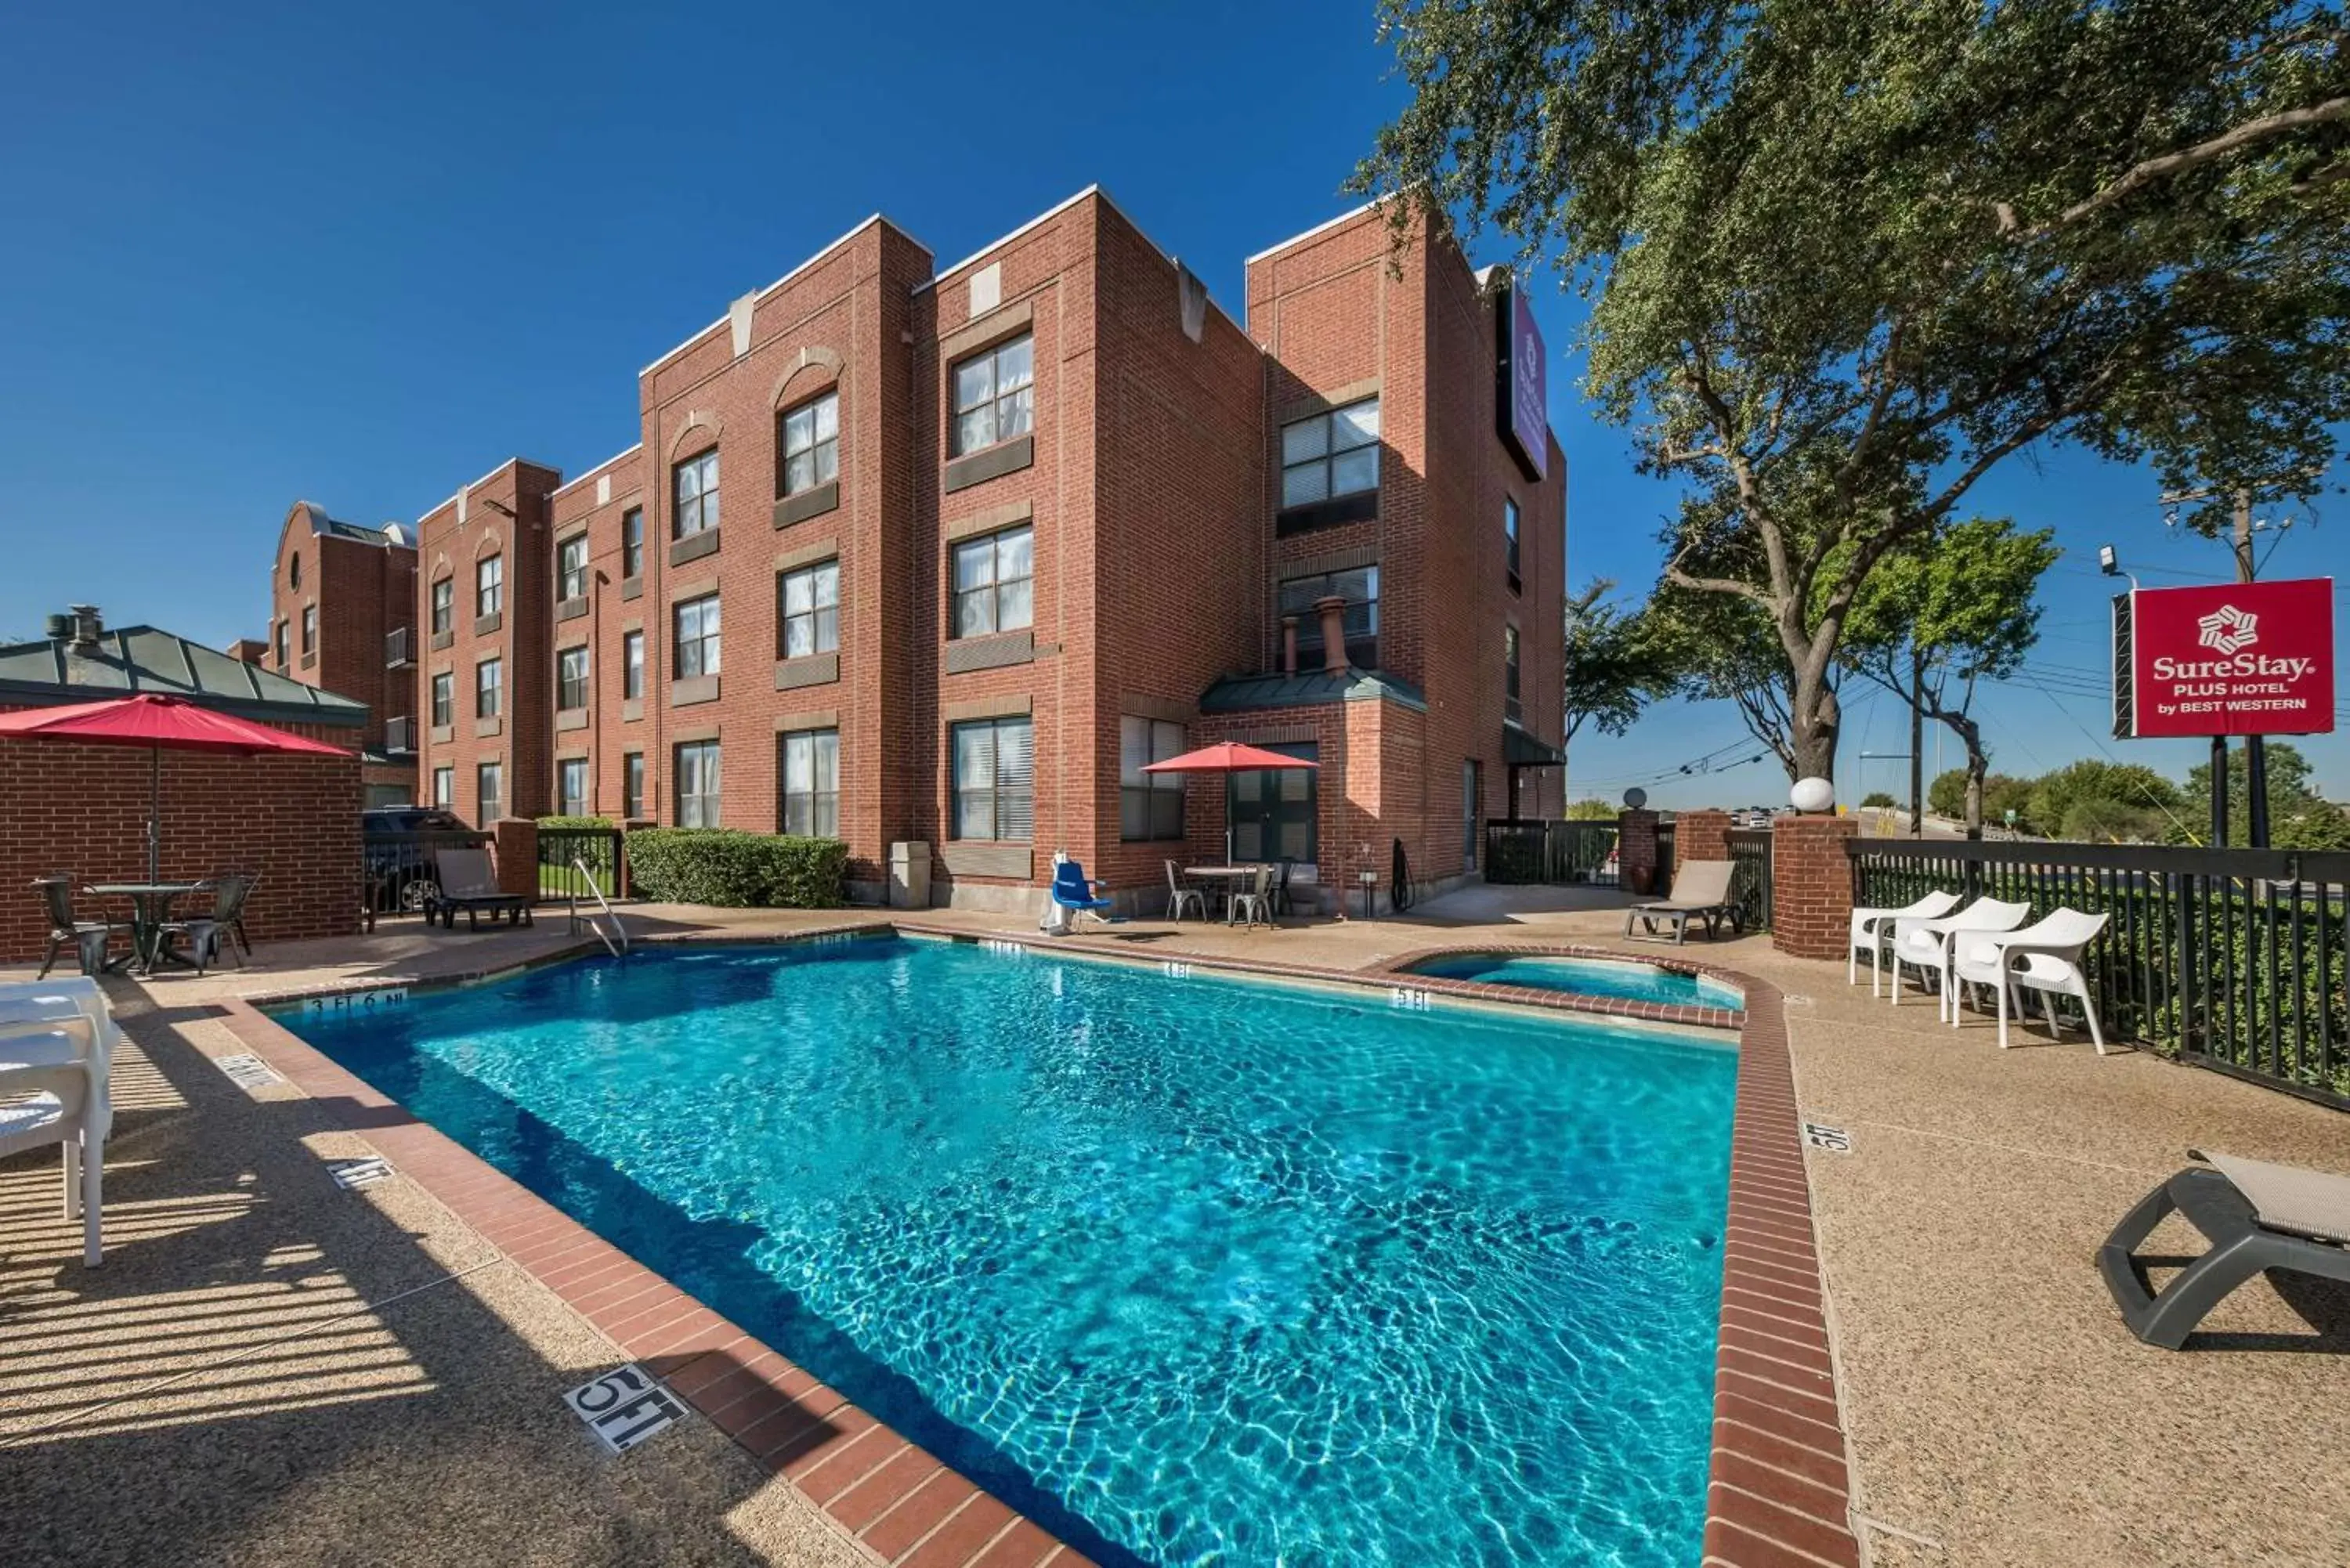 Pool view, Property Building in SureStay Plus Hotel by Best Western Plano